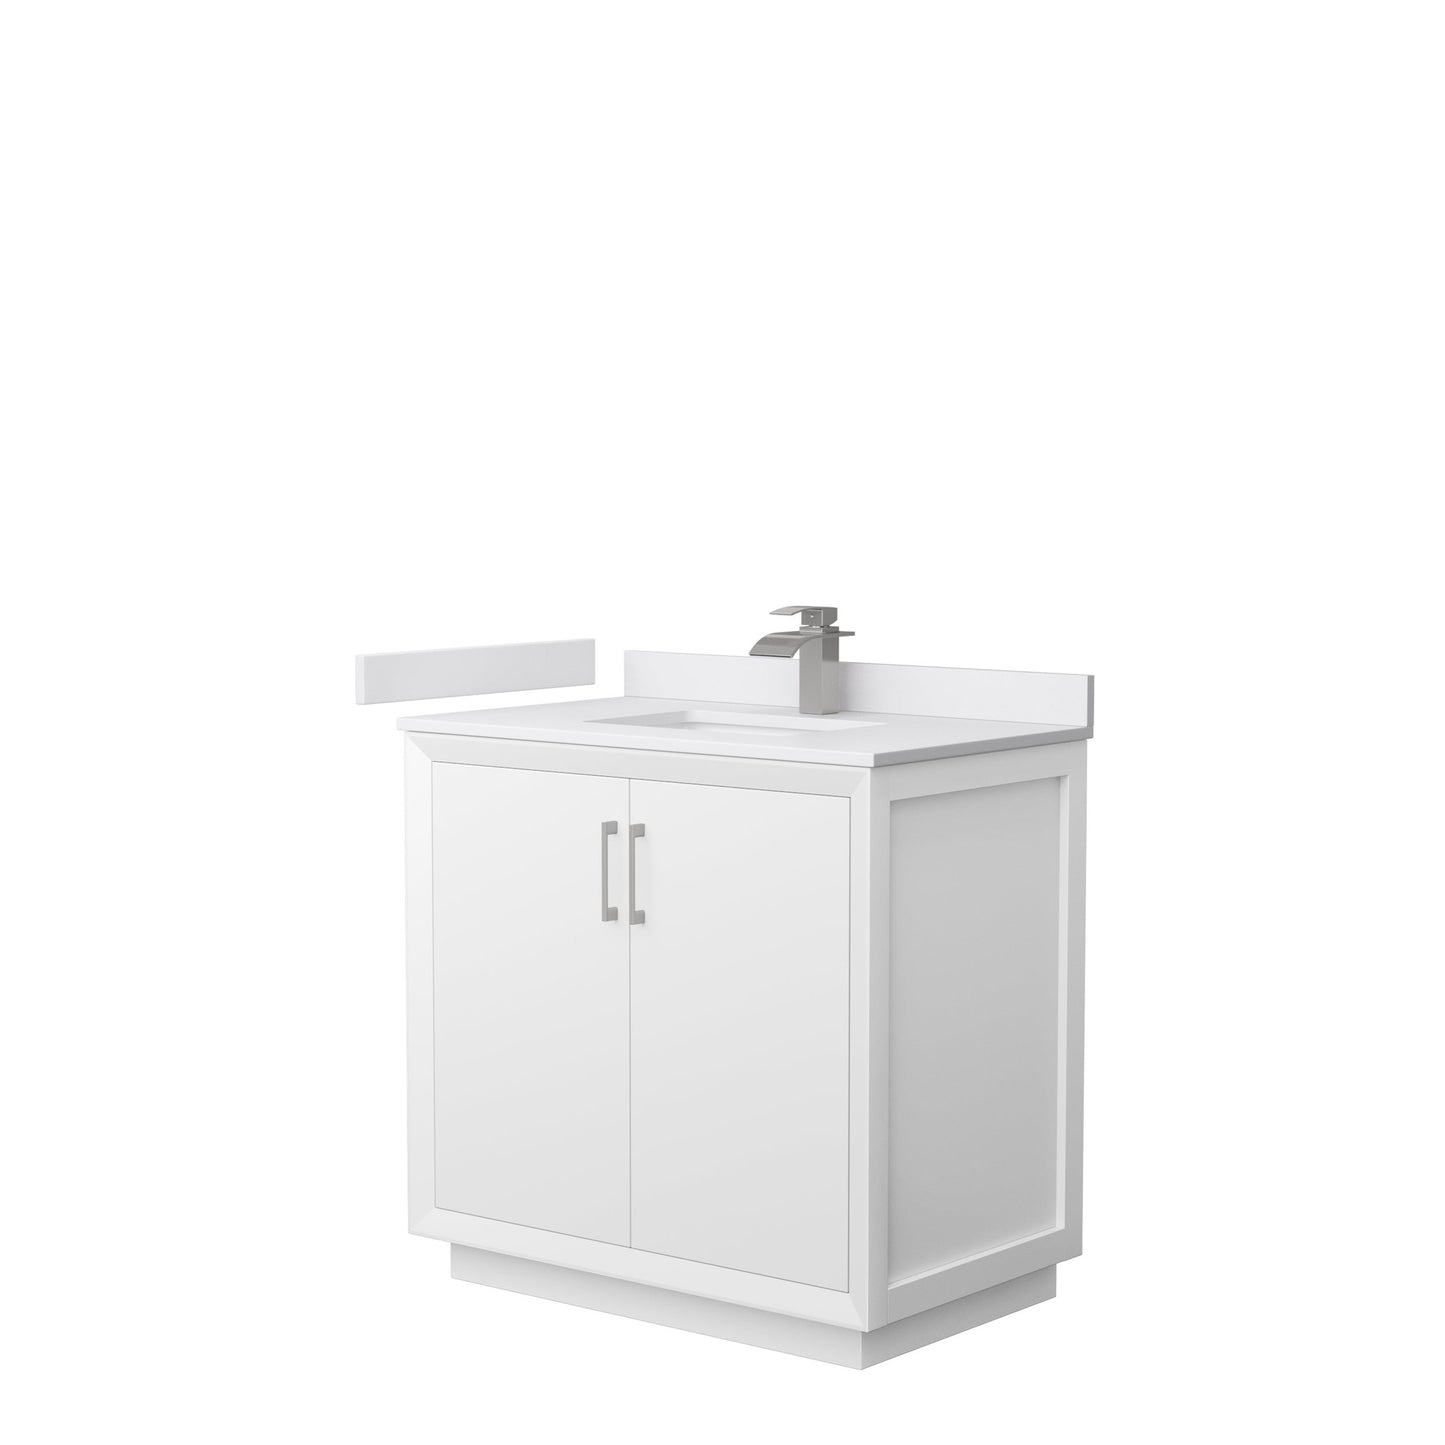 Wyndham Collection Strada 36" Single Bathroom Vanity in White, White Cultured Marble Countertop, Undermount Square Sink, Brushed Nickel Trim